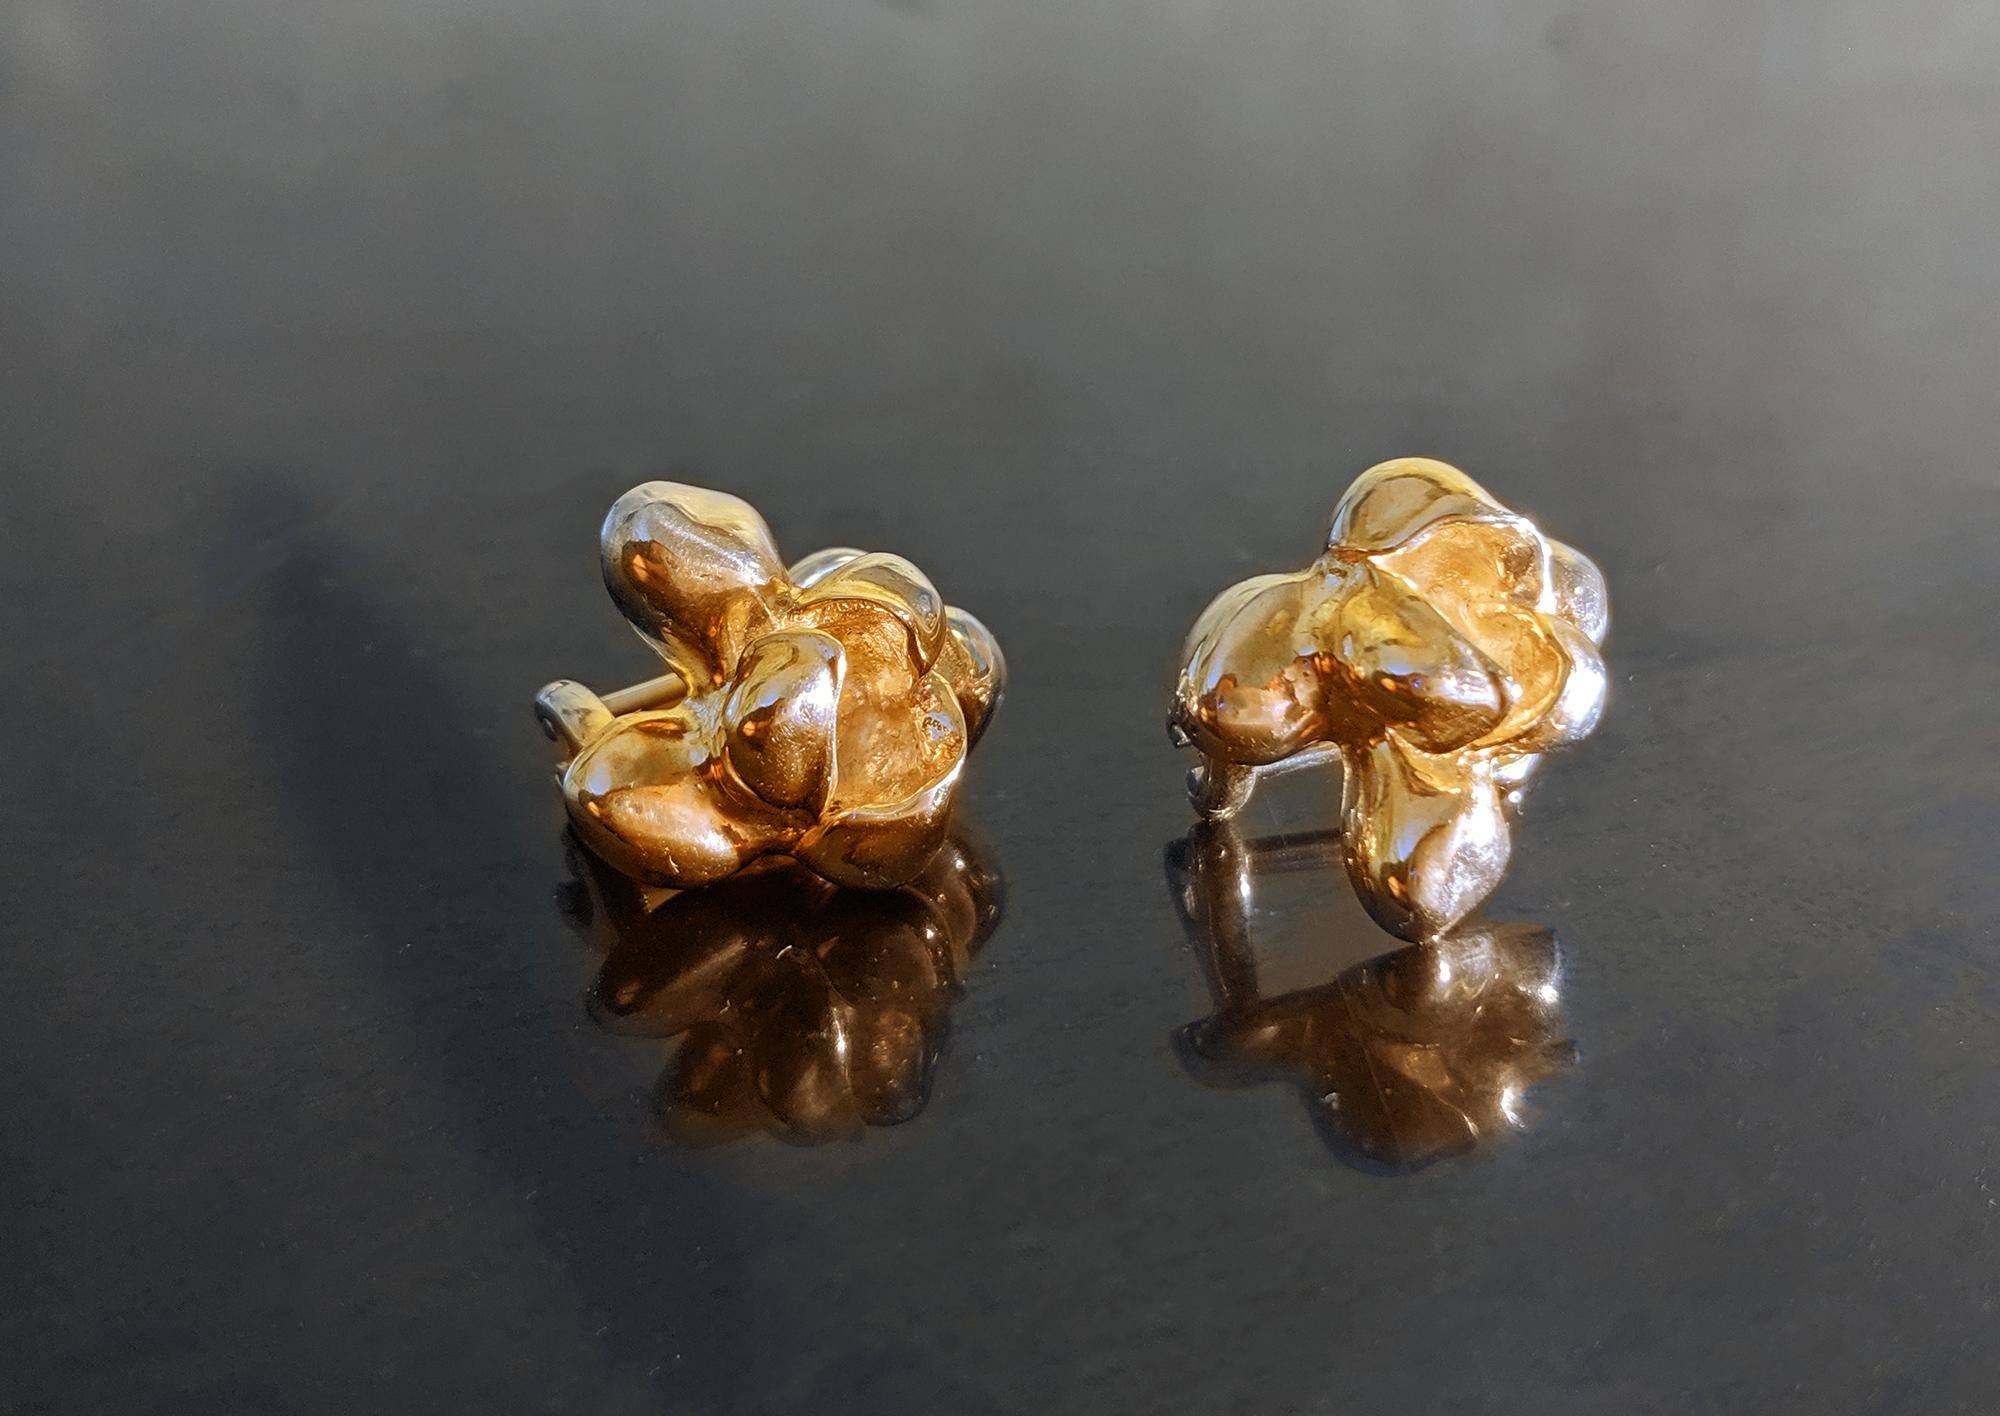 These Iris Blossom stud earrings feature a contemporary, transformer design. Made of yellow gold-plated sterling silver, they were chosen by German actress Anne Ratte-Polle to complement her stage outfit when receiving the Bavarian Film Award.

The